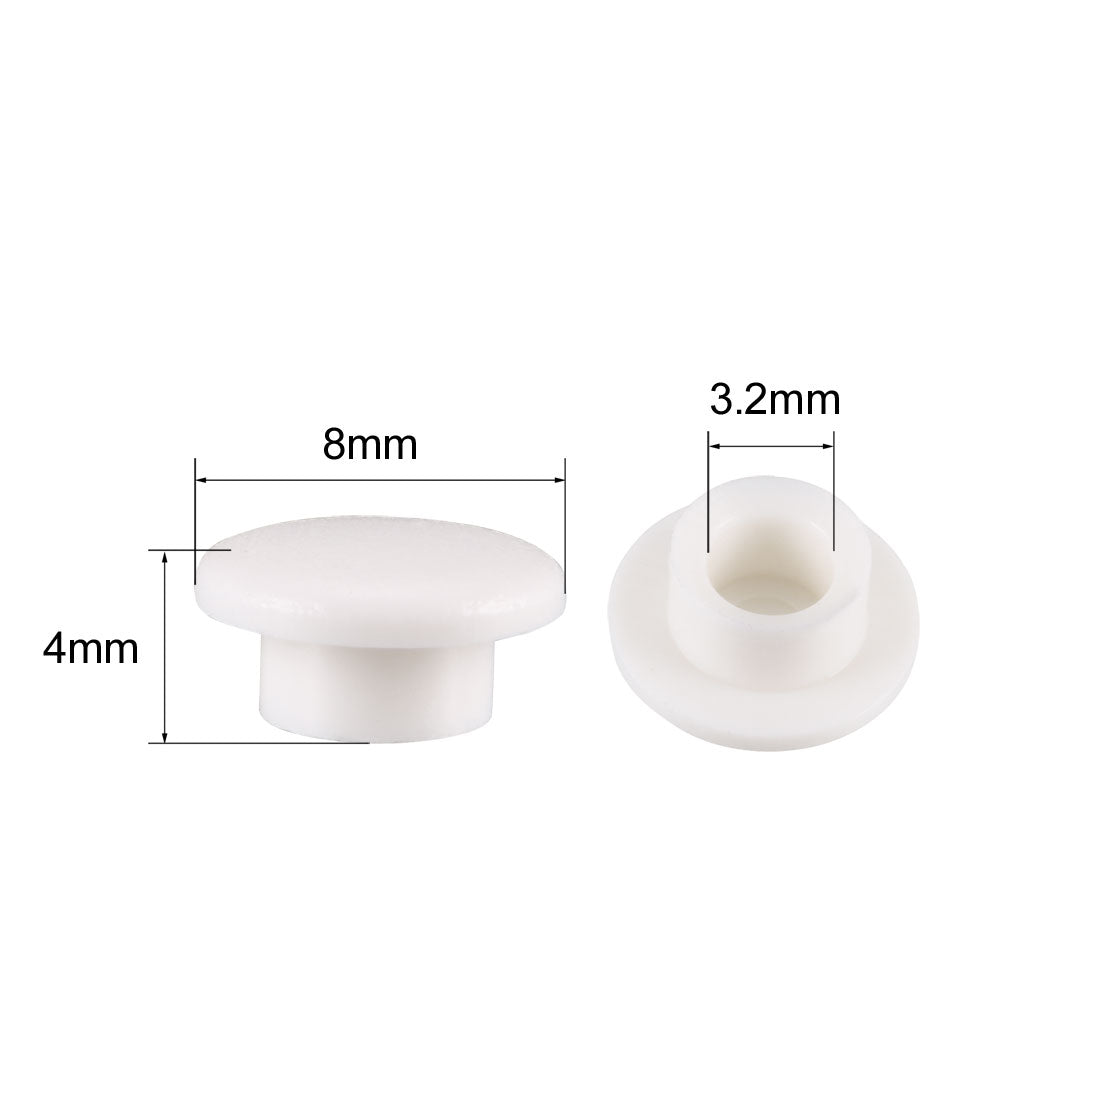 uxcell Uxcell 30Pcs 3.2mm Hole Dia Plastic Push Button Tactile Switch Caps Cover Keycaps Protector White for 6x6 Micro Switch